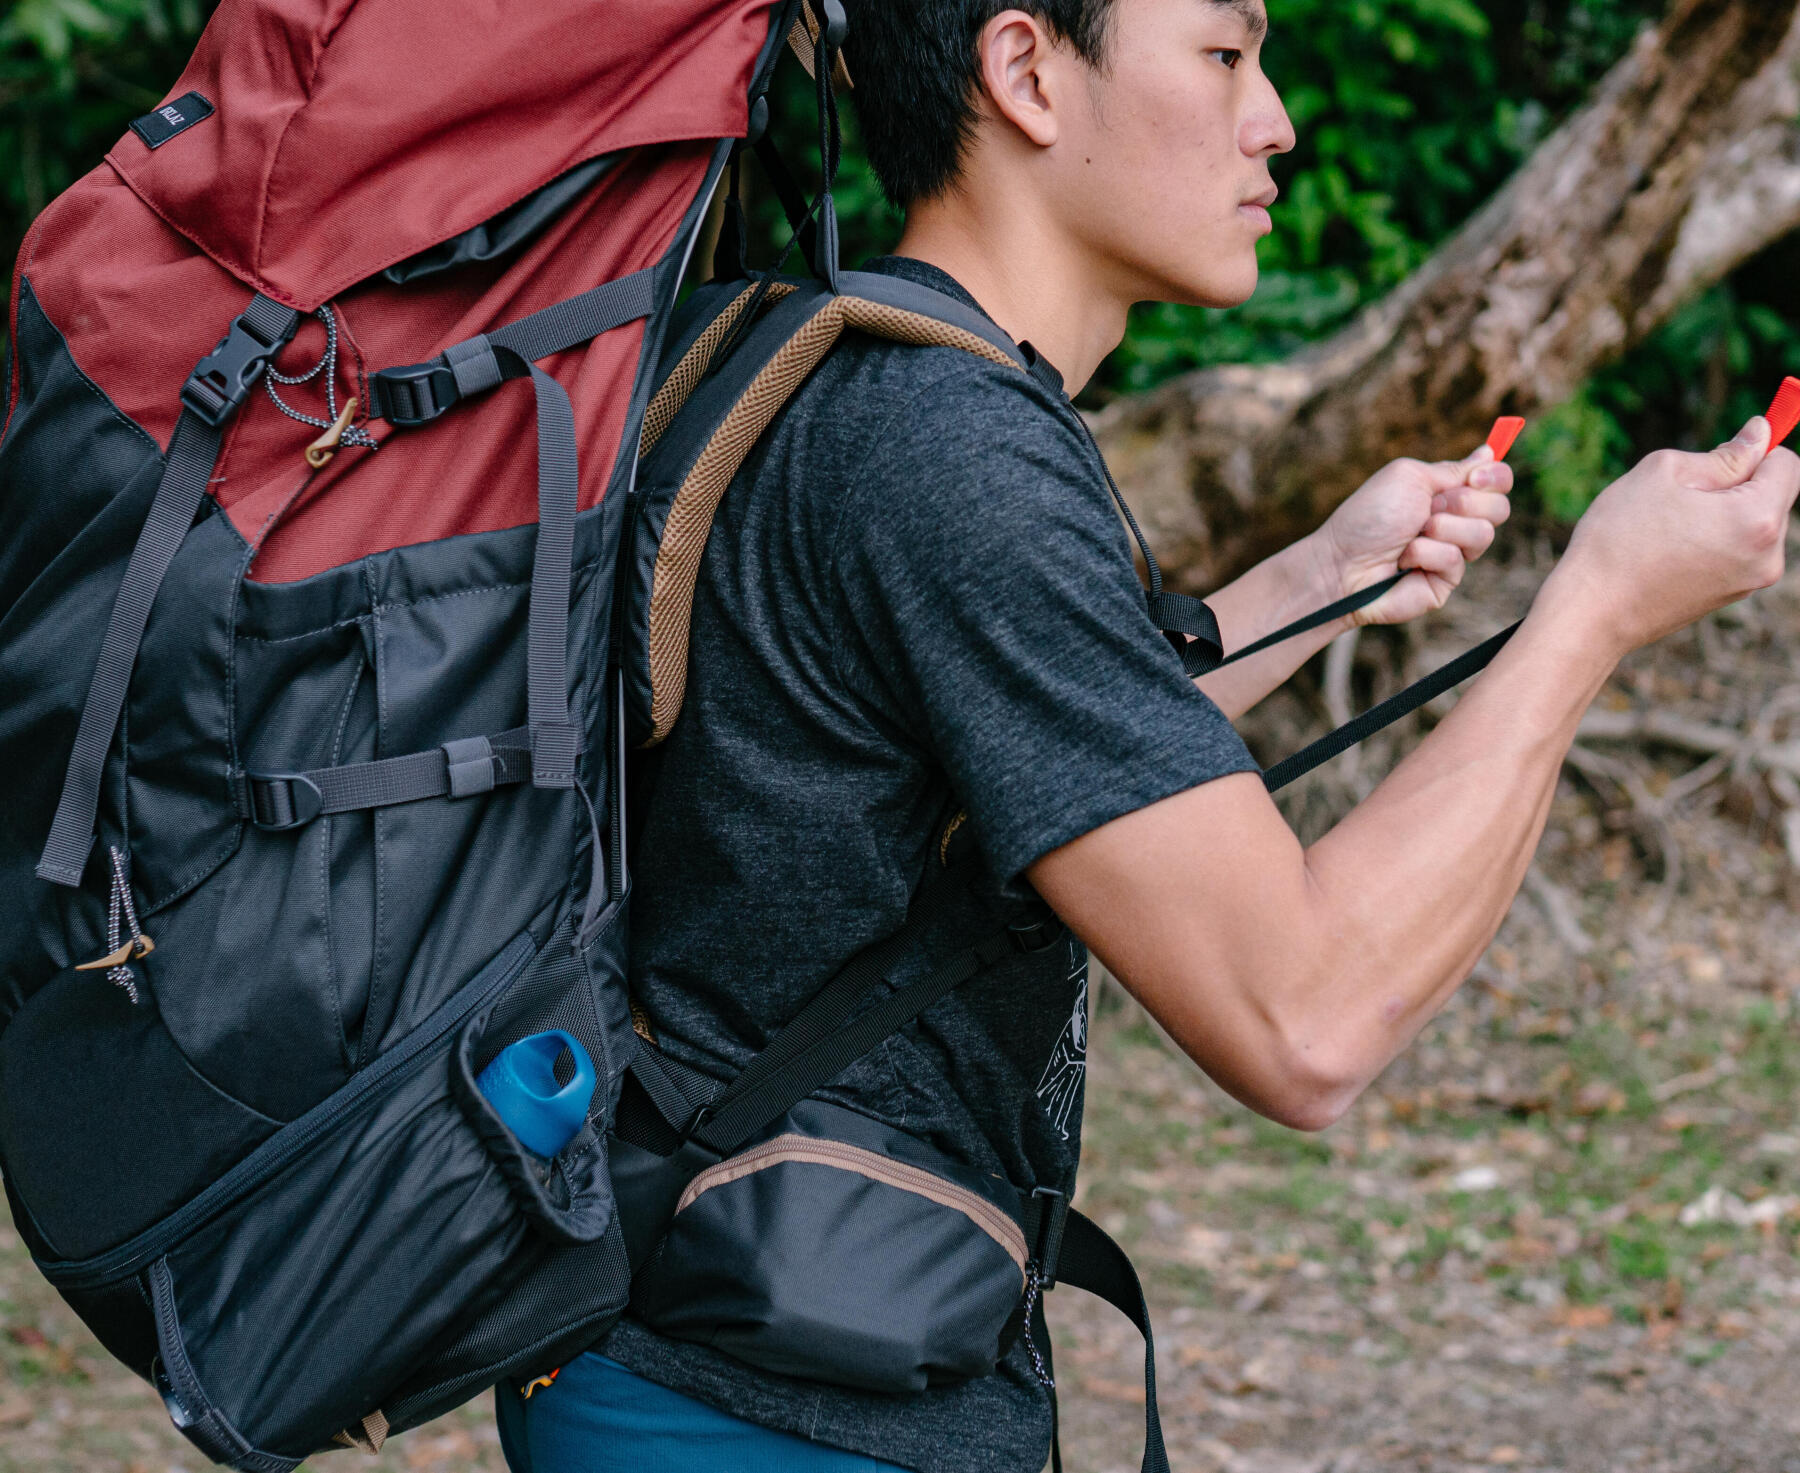 CAMPING | HOW TO PACK YOUR BACKPACK FOR CAMPING?